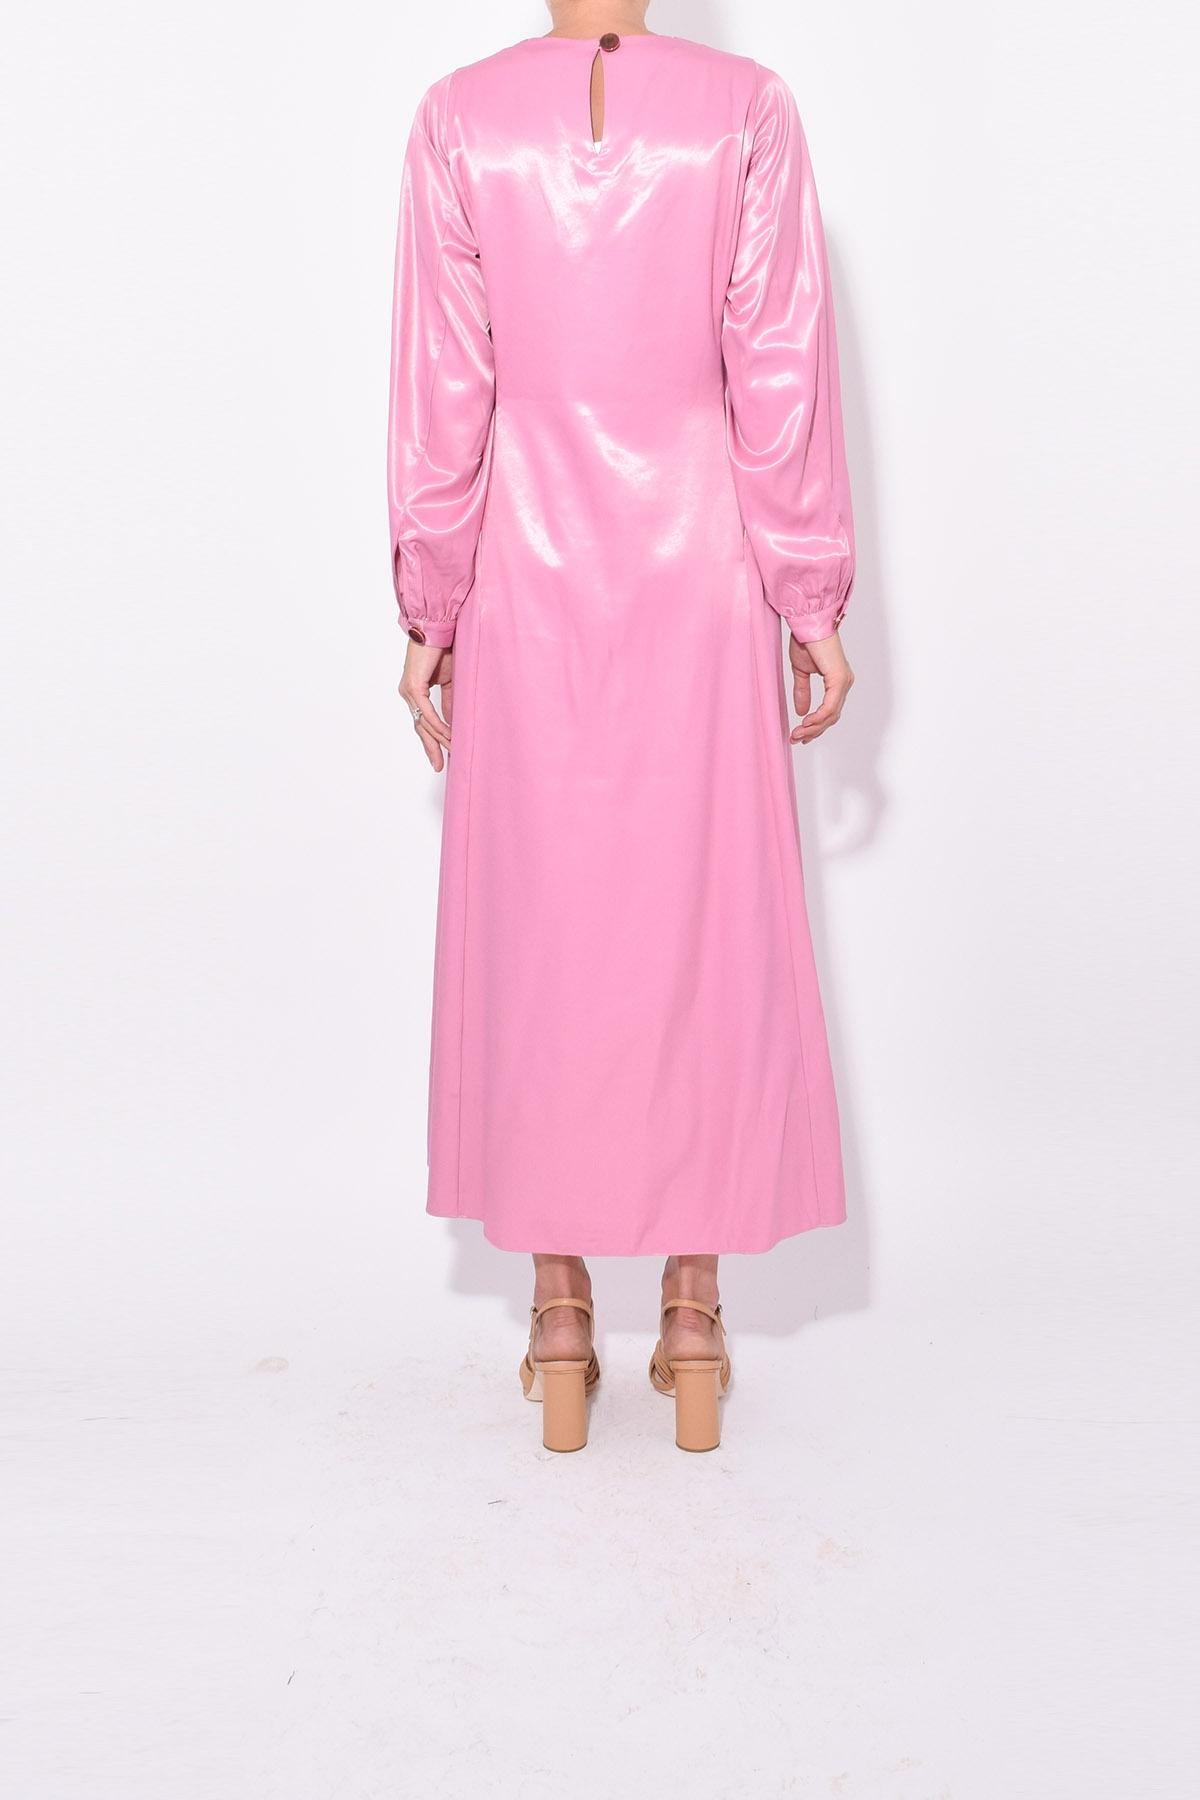 Rodebjer Julinka Occasion Dress In Smoky Pink - Lyst